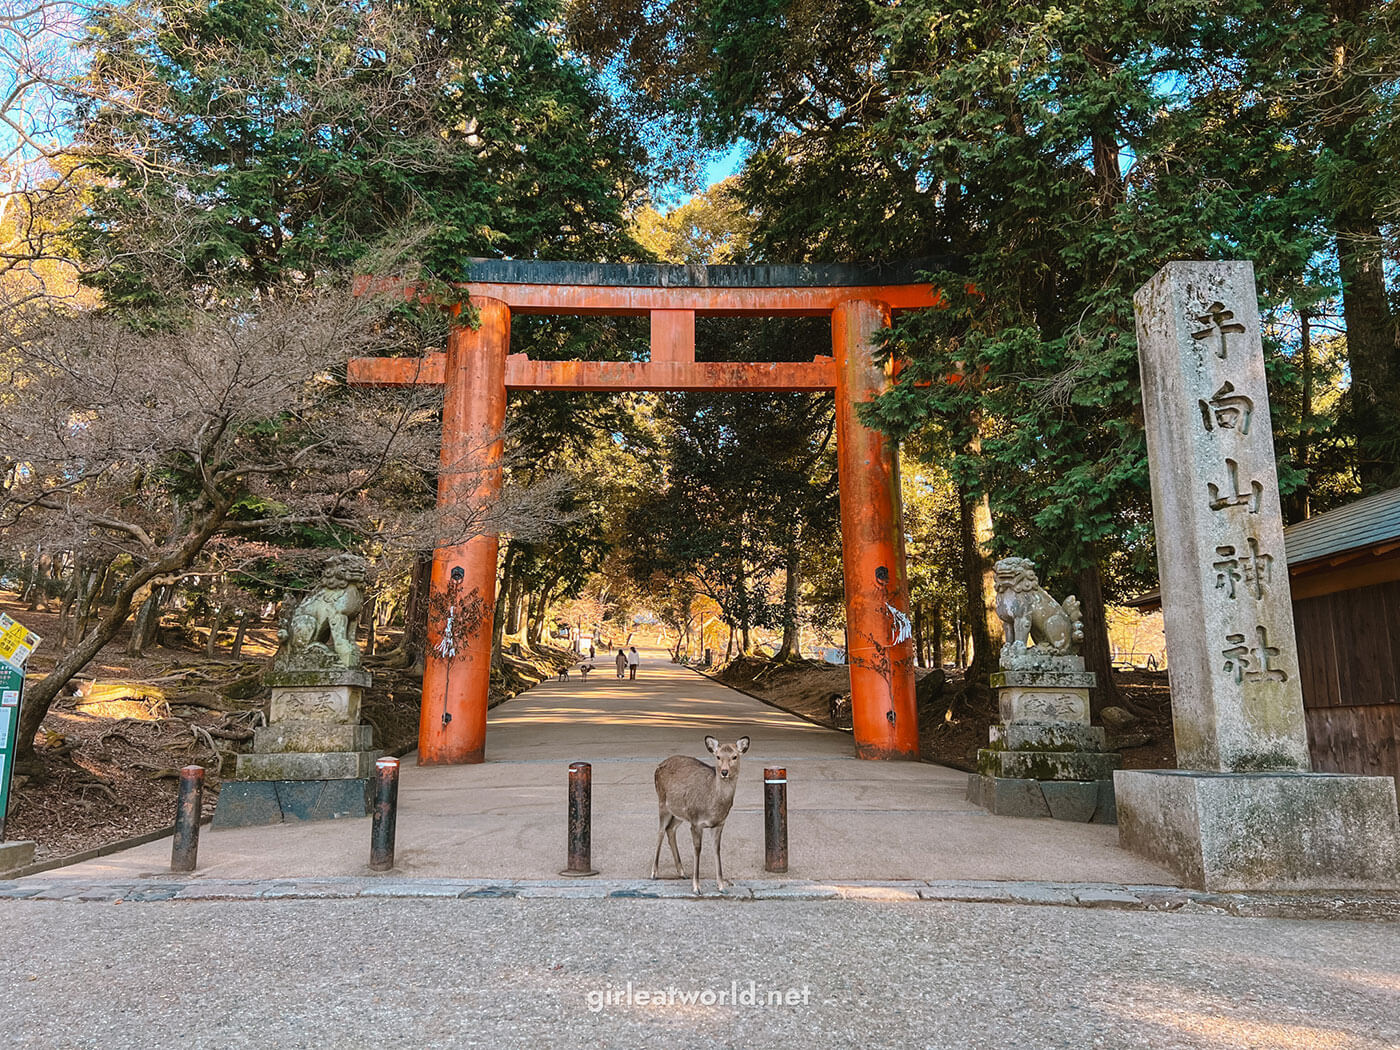 Nara Itinerary - Sika Deer in front of a red torii